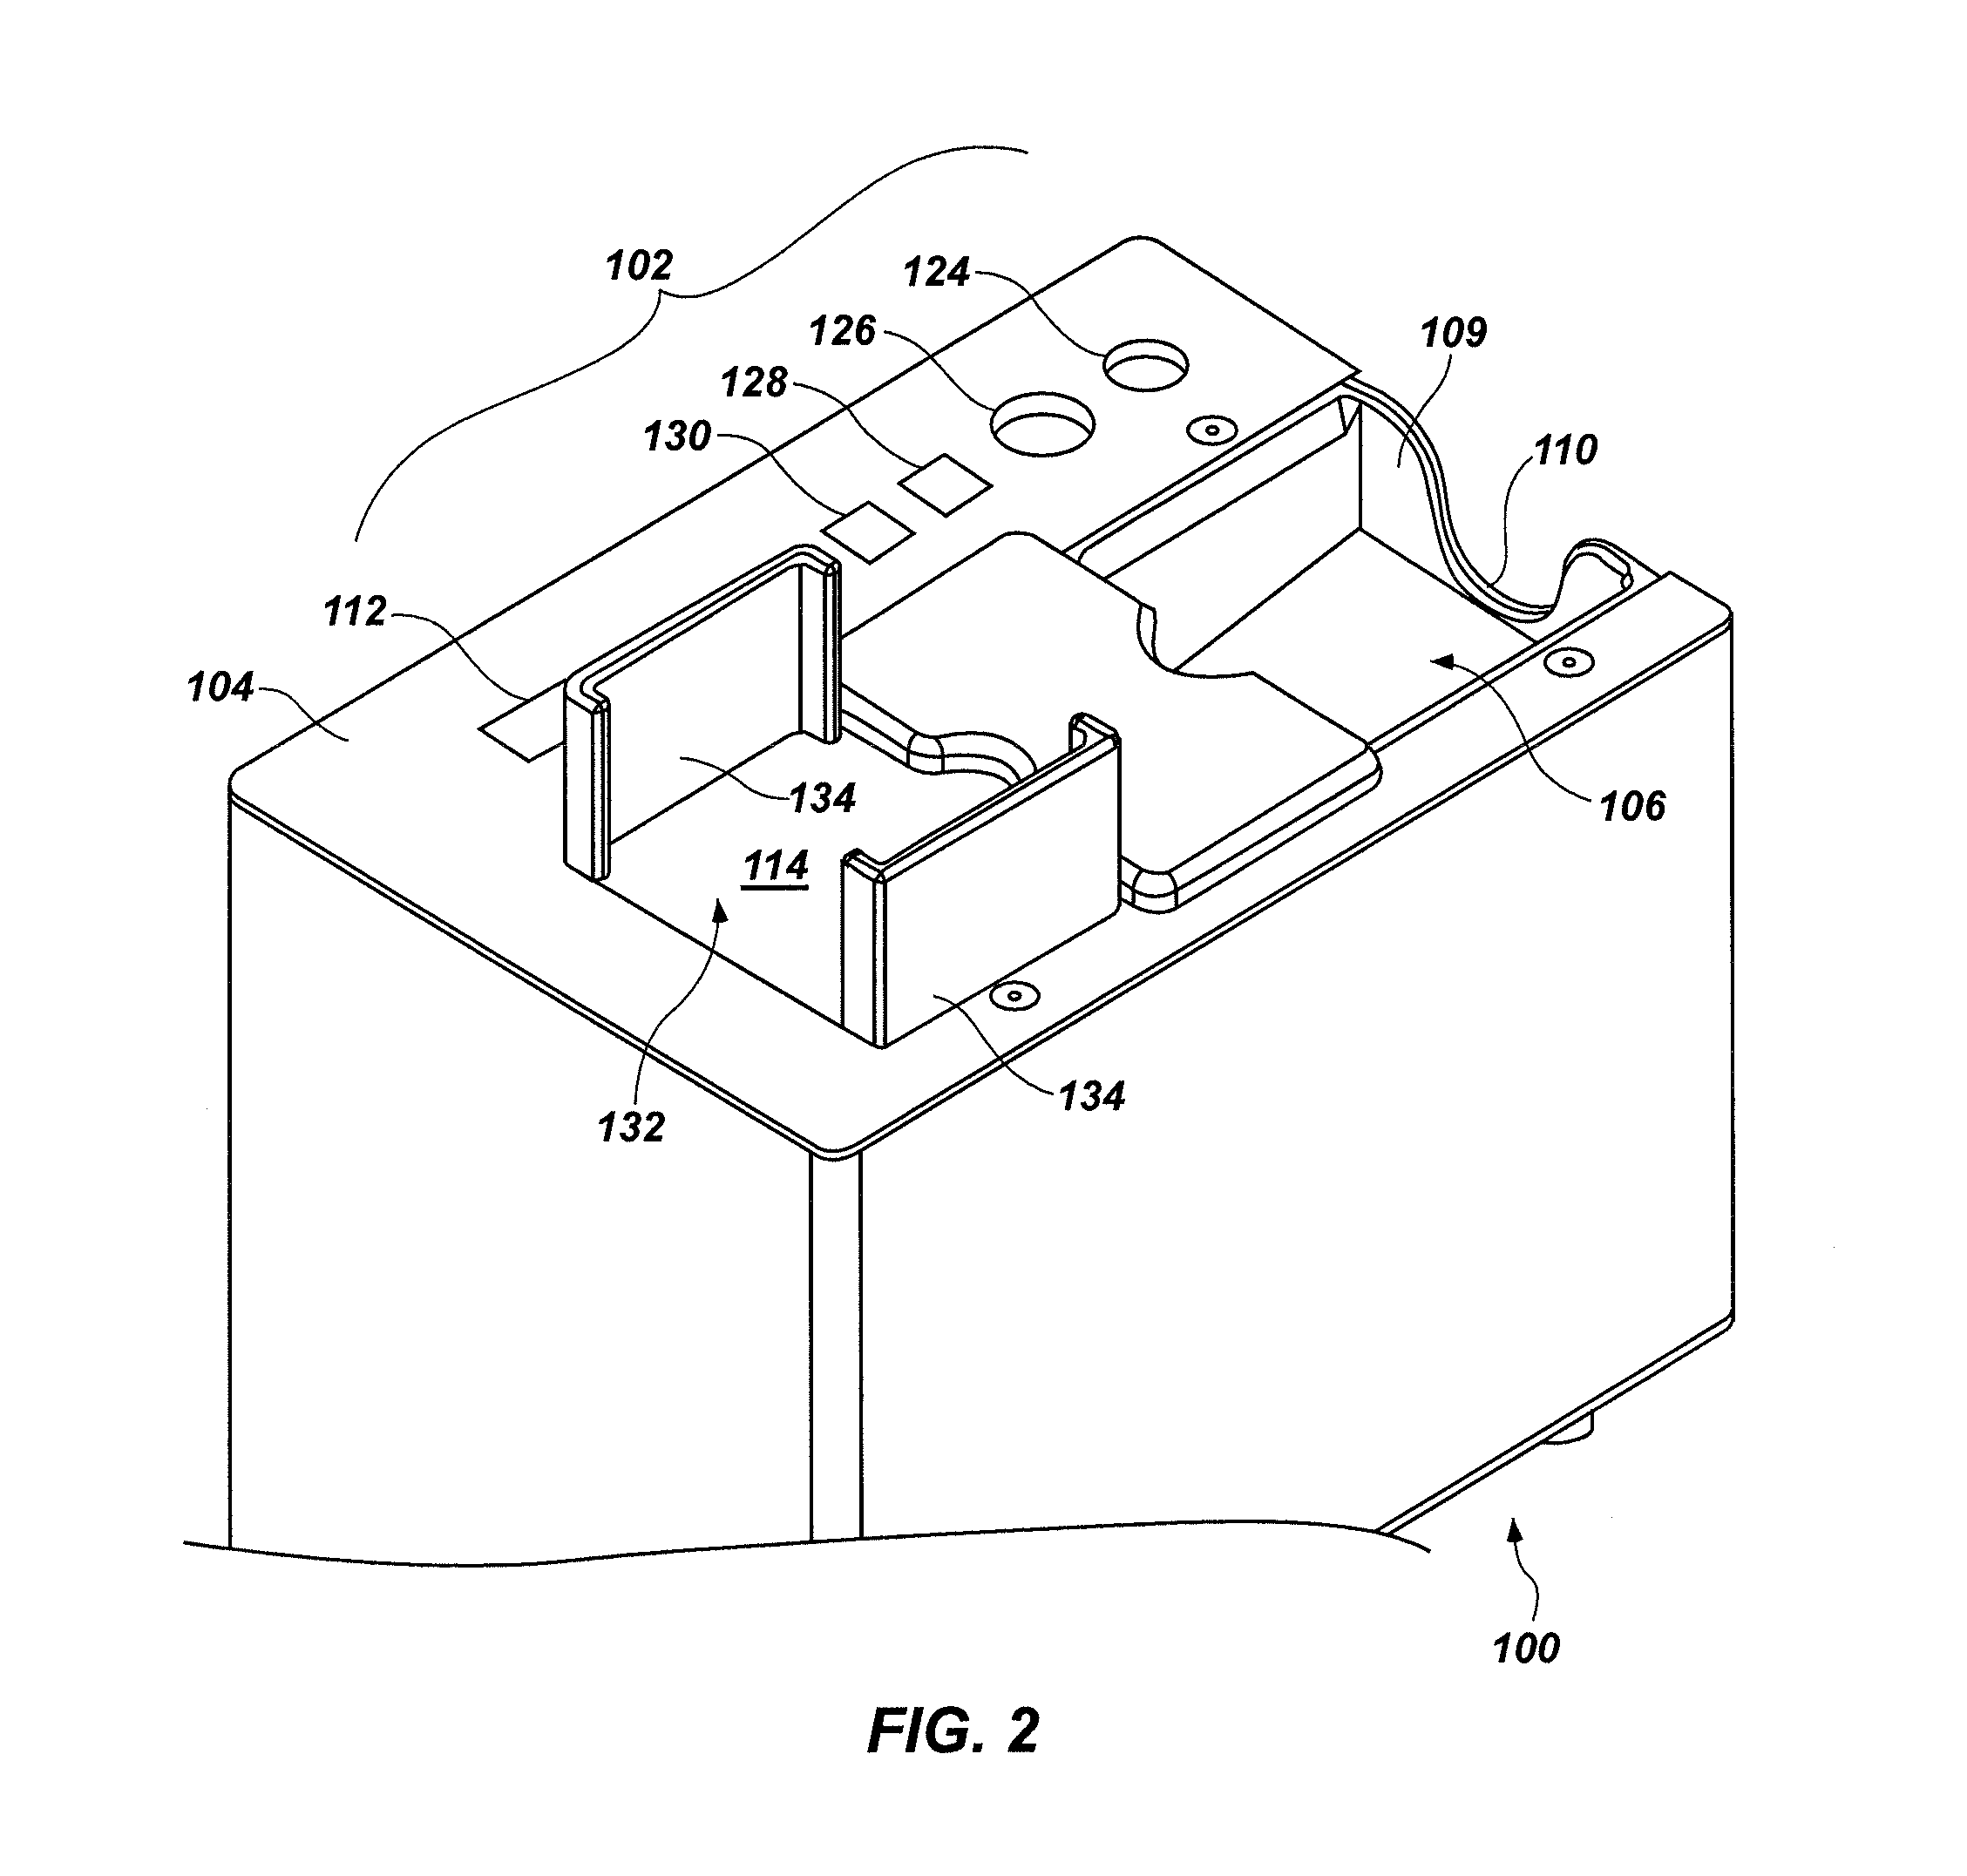 Playing card handling devices, systems, and methods for verifying sets of cards